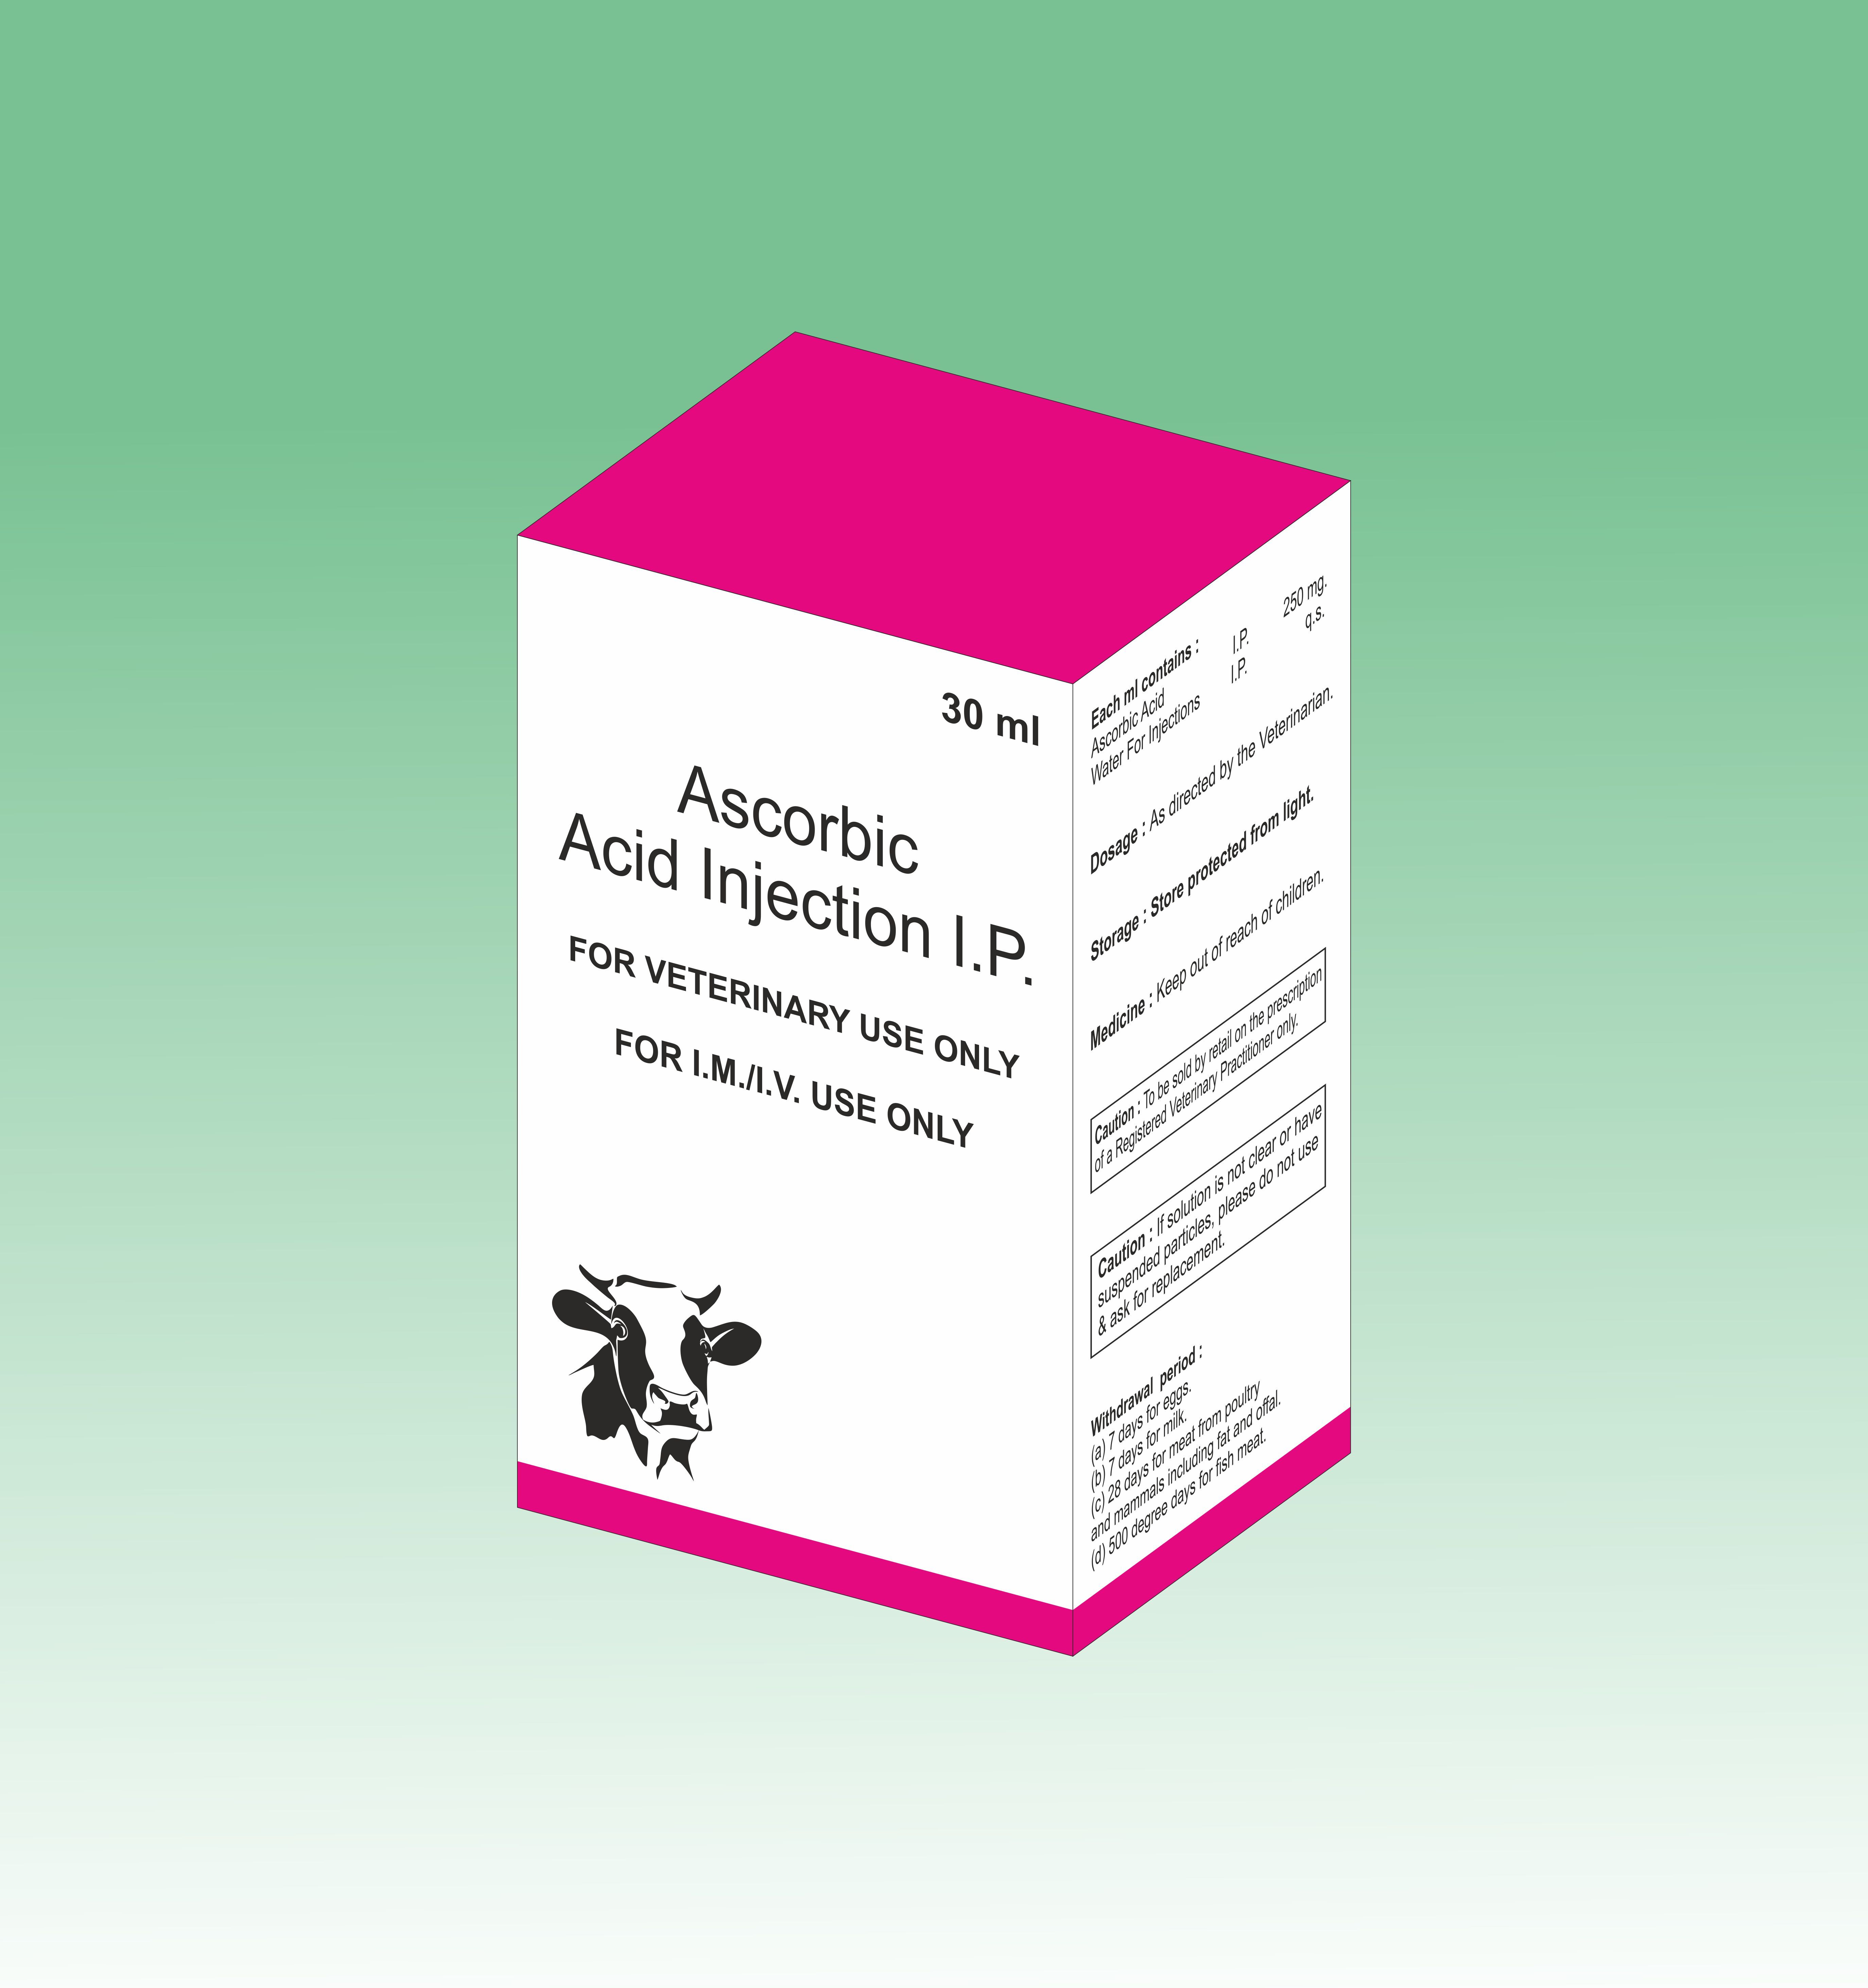 AMOXYCILLIN WITH CLOXACILLIN INJECTION IN THIRD PARTY MANUFACTURING